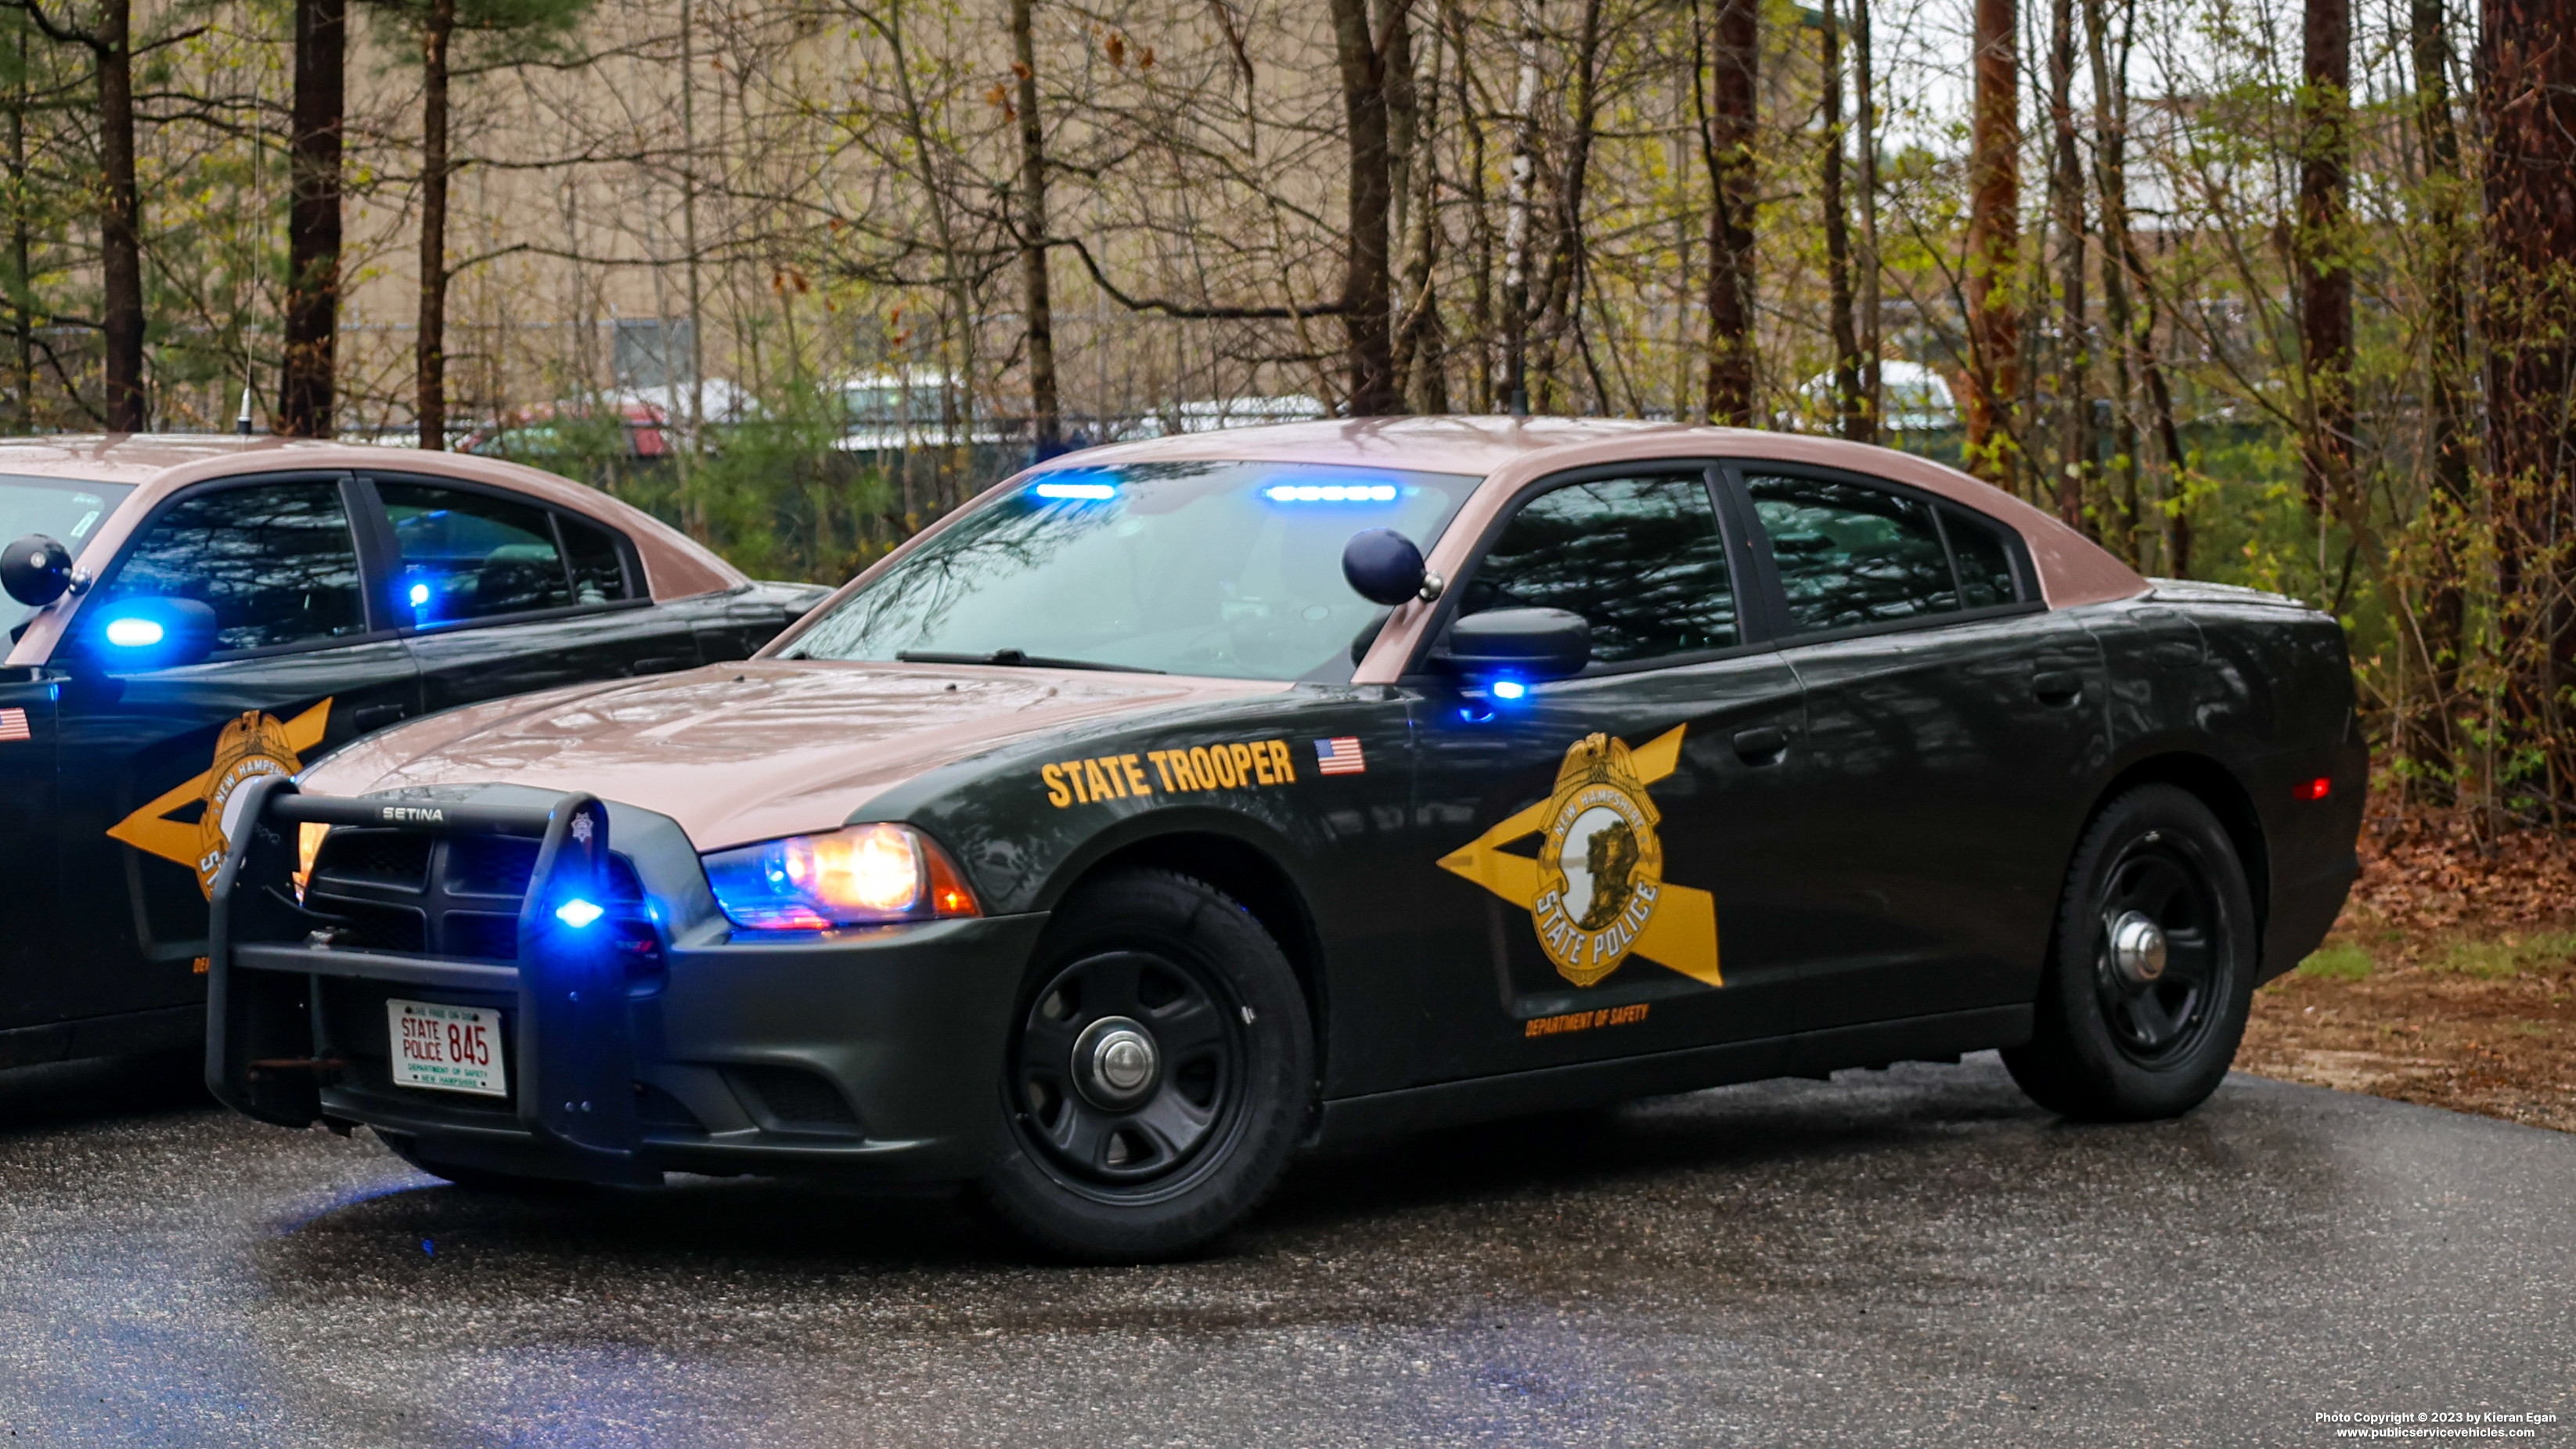 A photo  of New Hampshire State Police
            Cruiser 845, a 2011-2014 Dodge Charger             taken by Kieran Egan